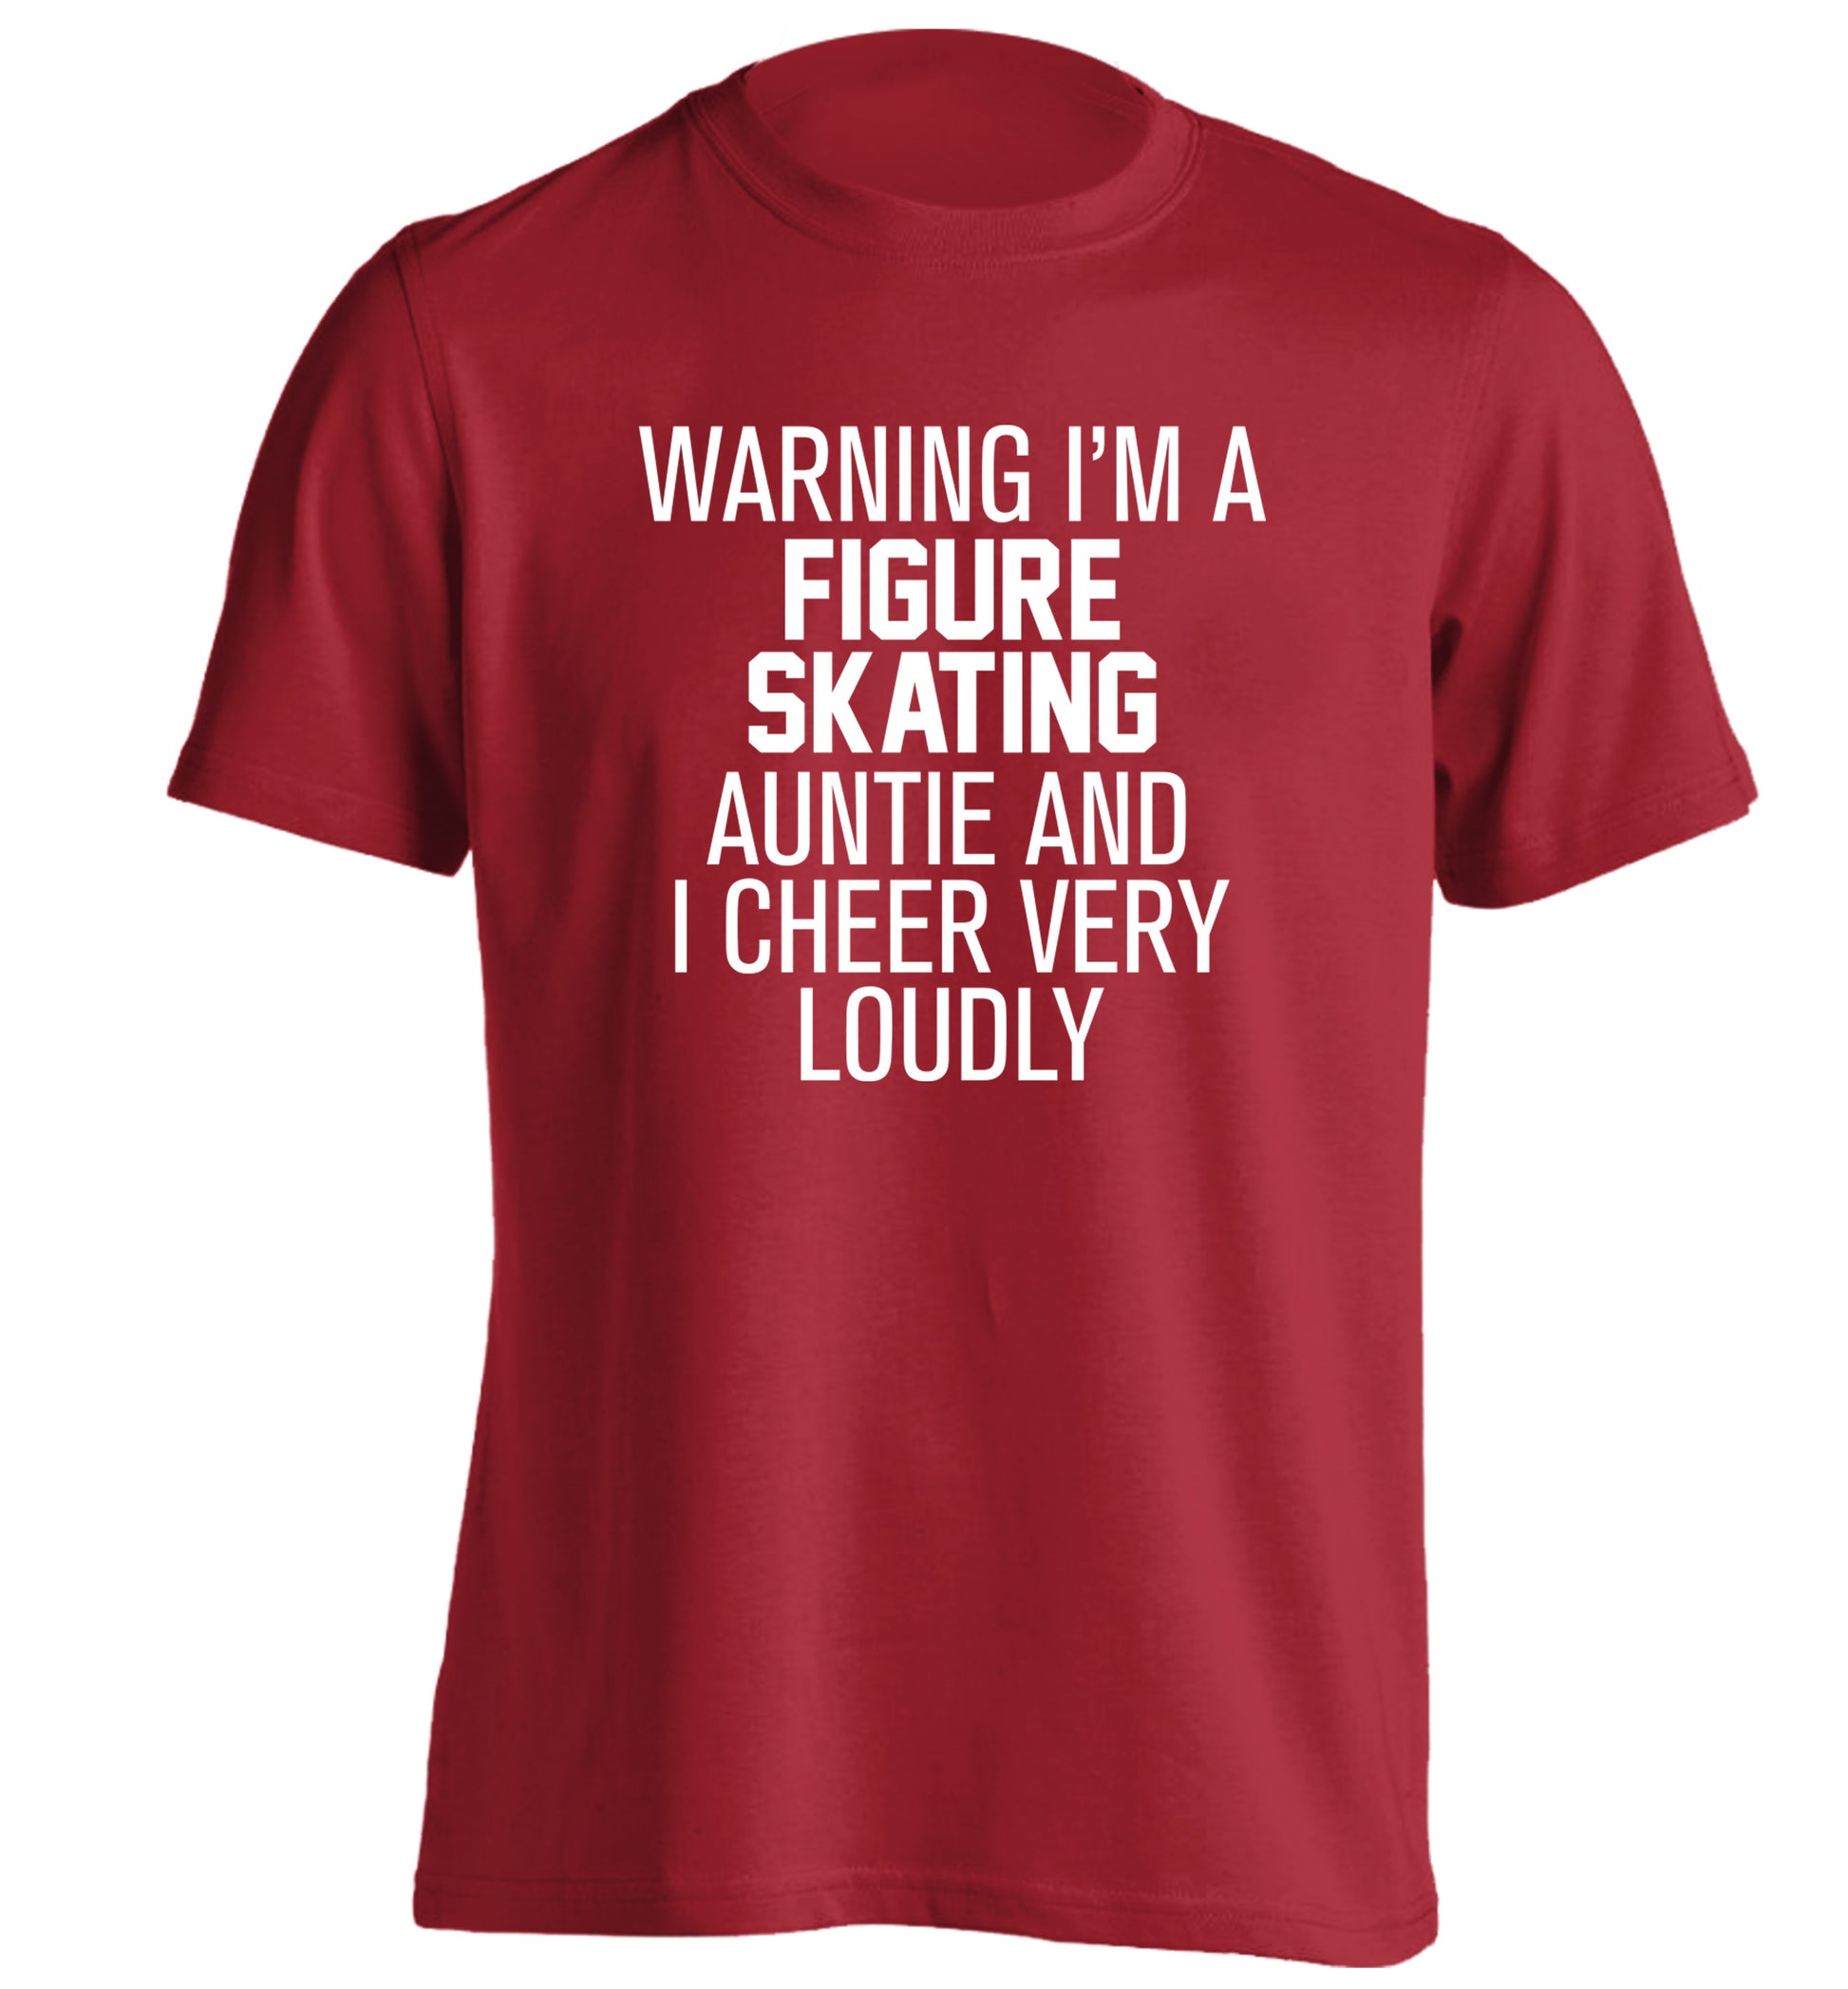 Warning I'm a figure skating auntie and I cheer very loudly adults unisexred Tshirt 2XL